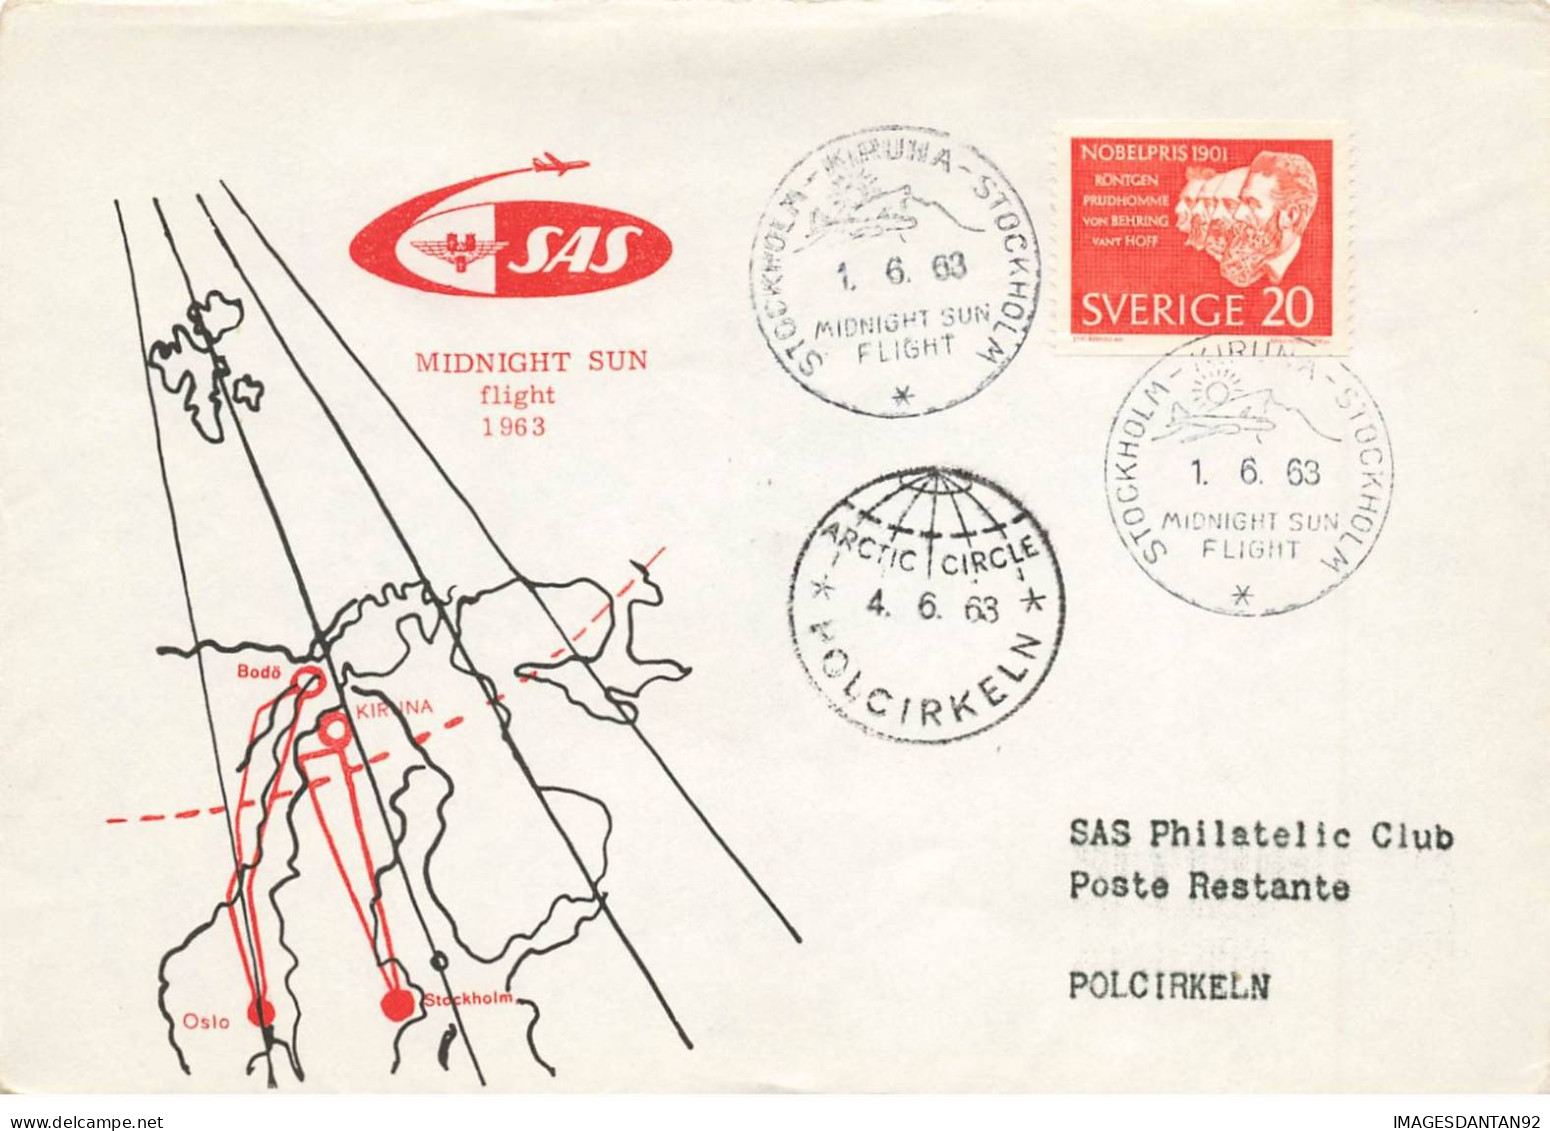 SUEDE #36381 MIDNIGHT SUN FLIGHT 1963 - Covers & Documents